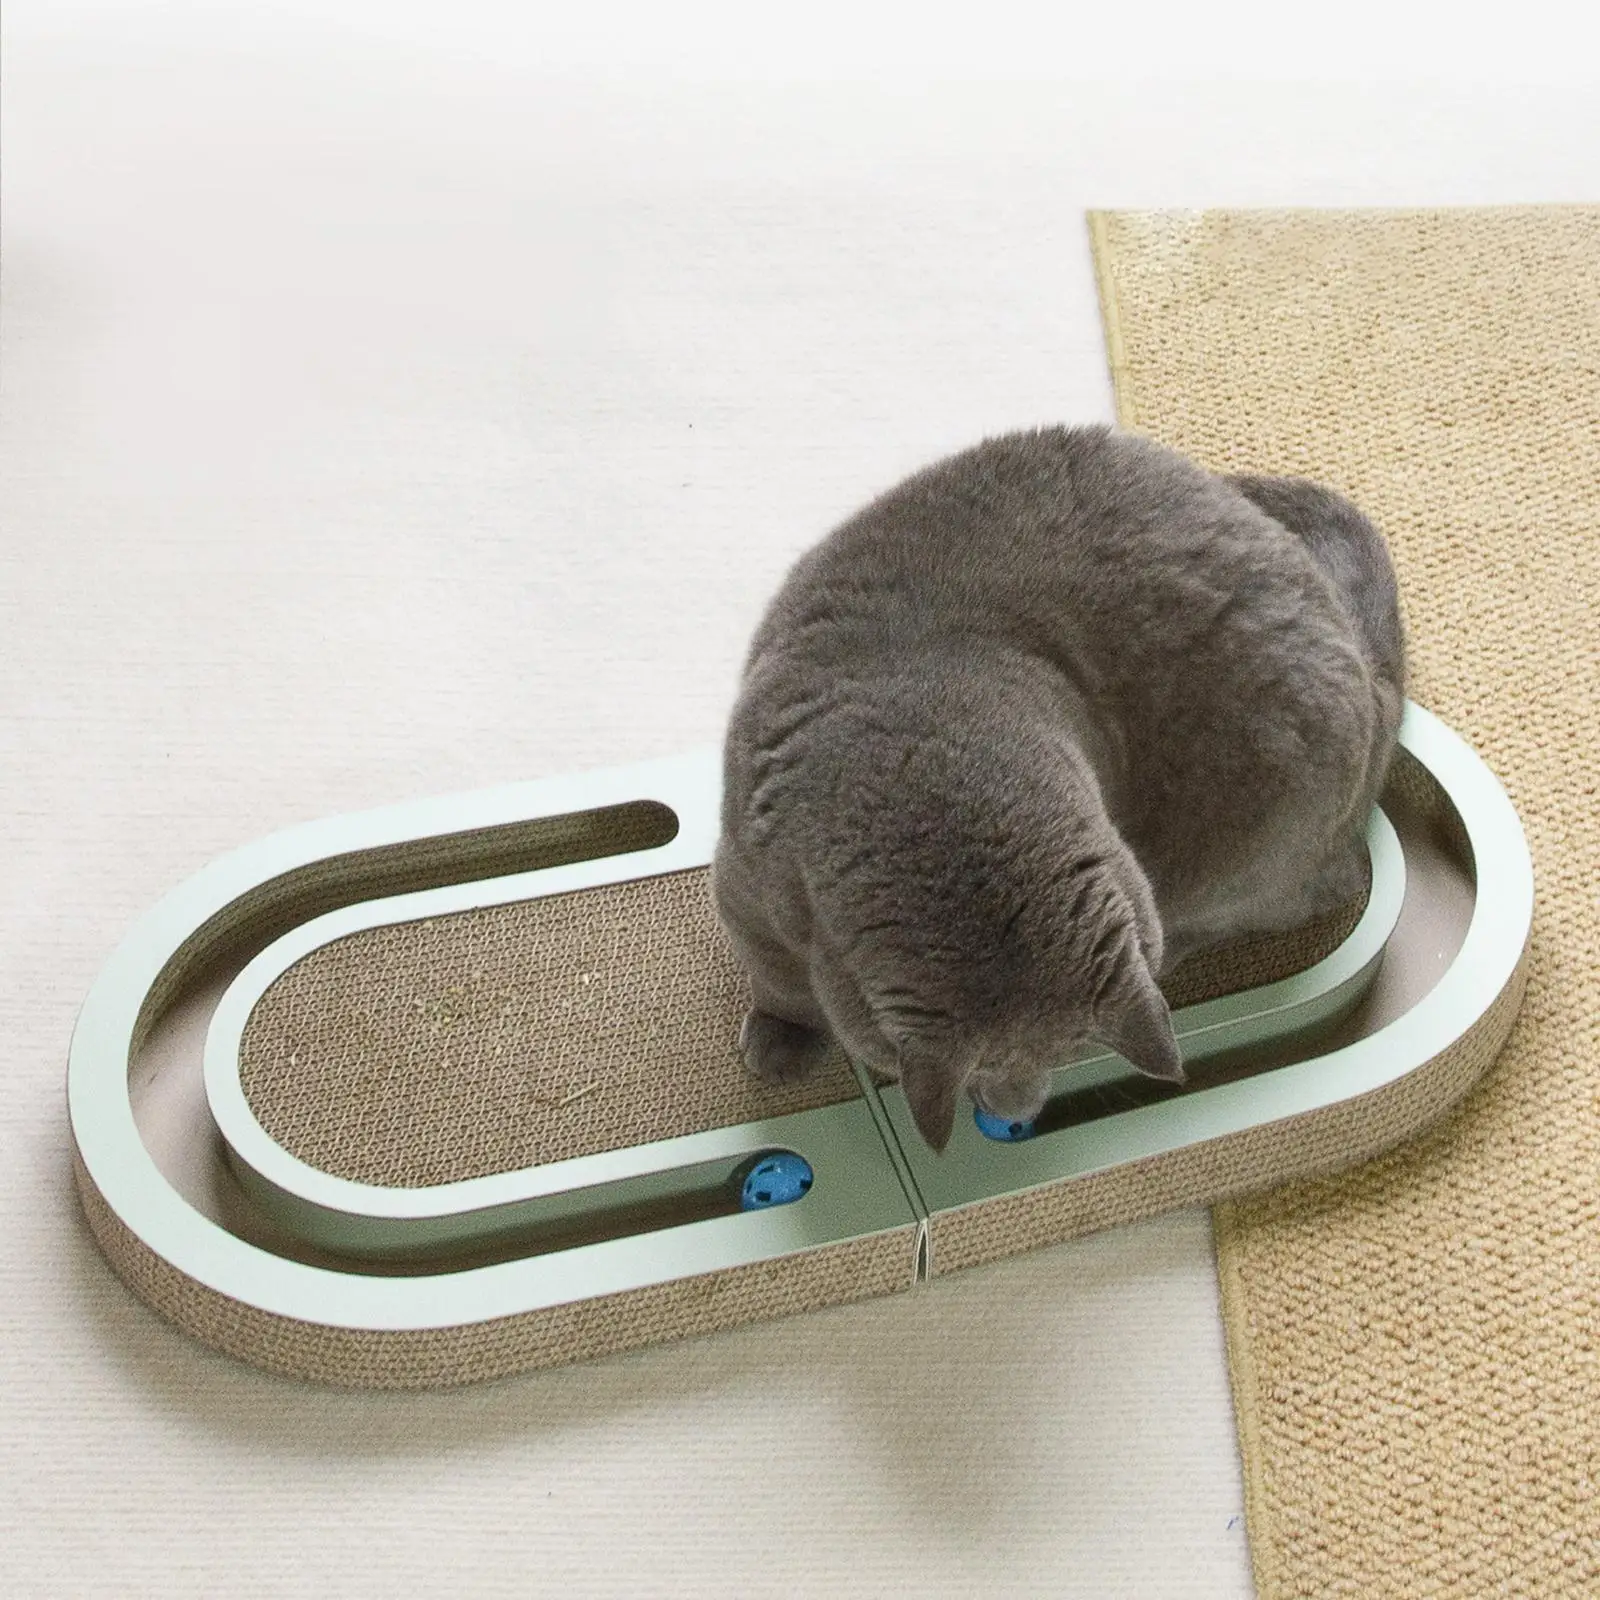 Ball Track Toys Scratching Board Couch Scratching Lounge Bed Cat Scratcher Cardboard for Small Medium Large Cats Kitten Sleeping